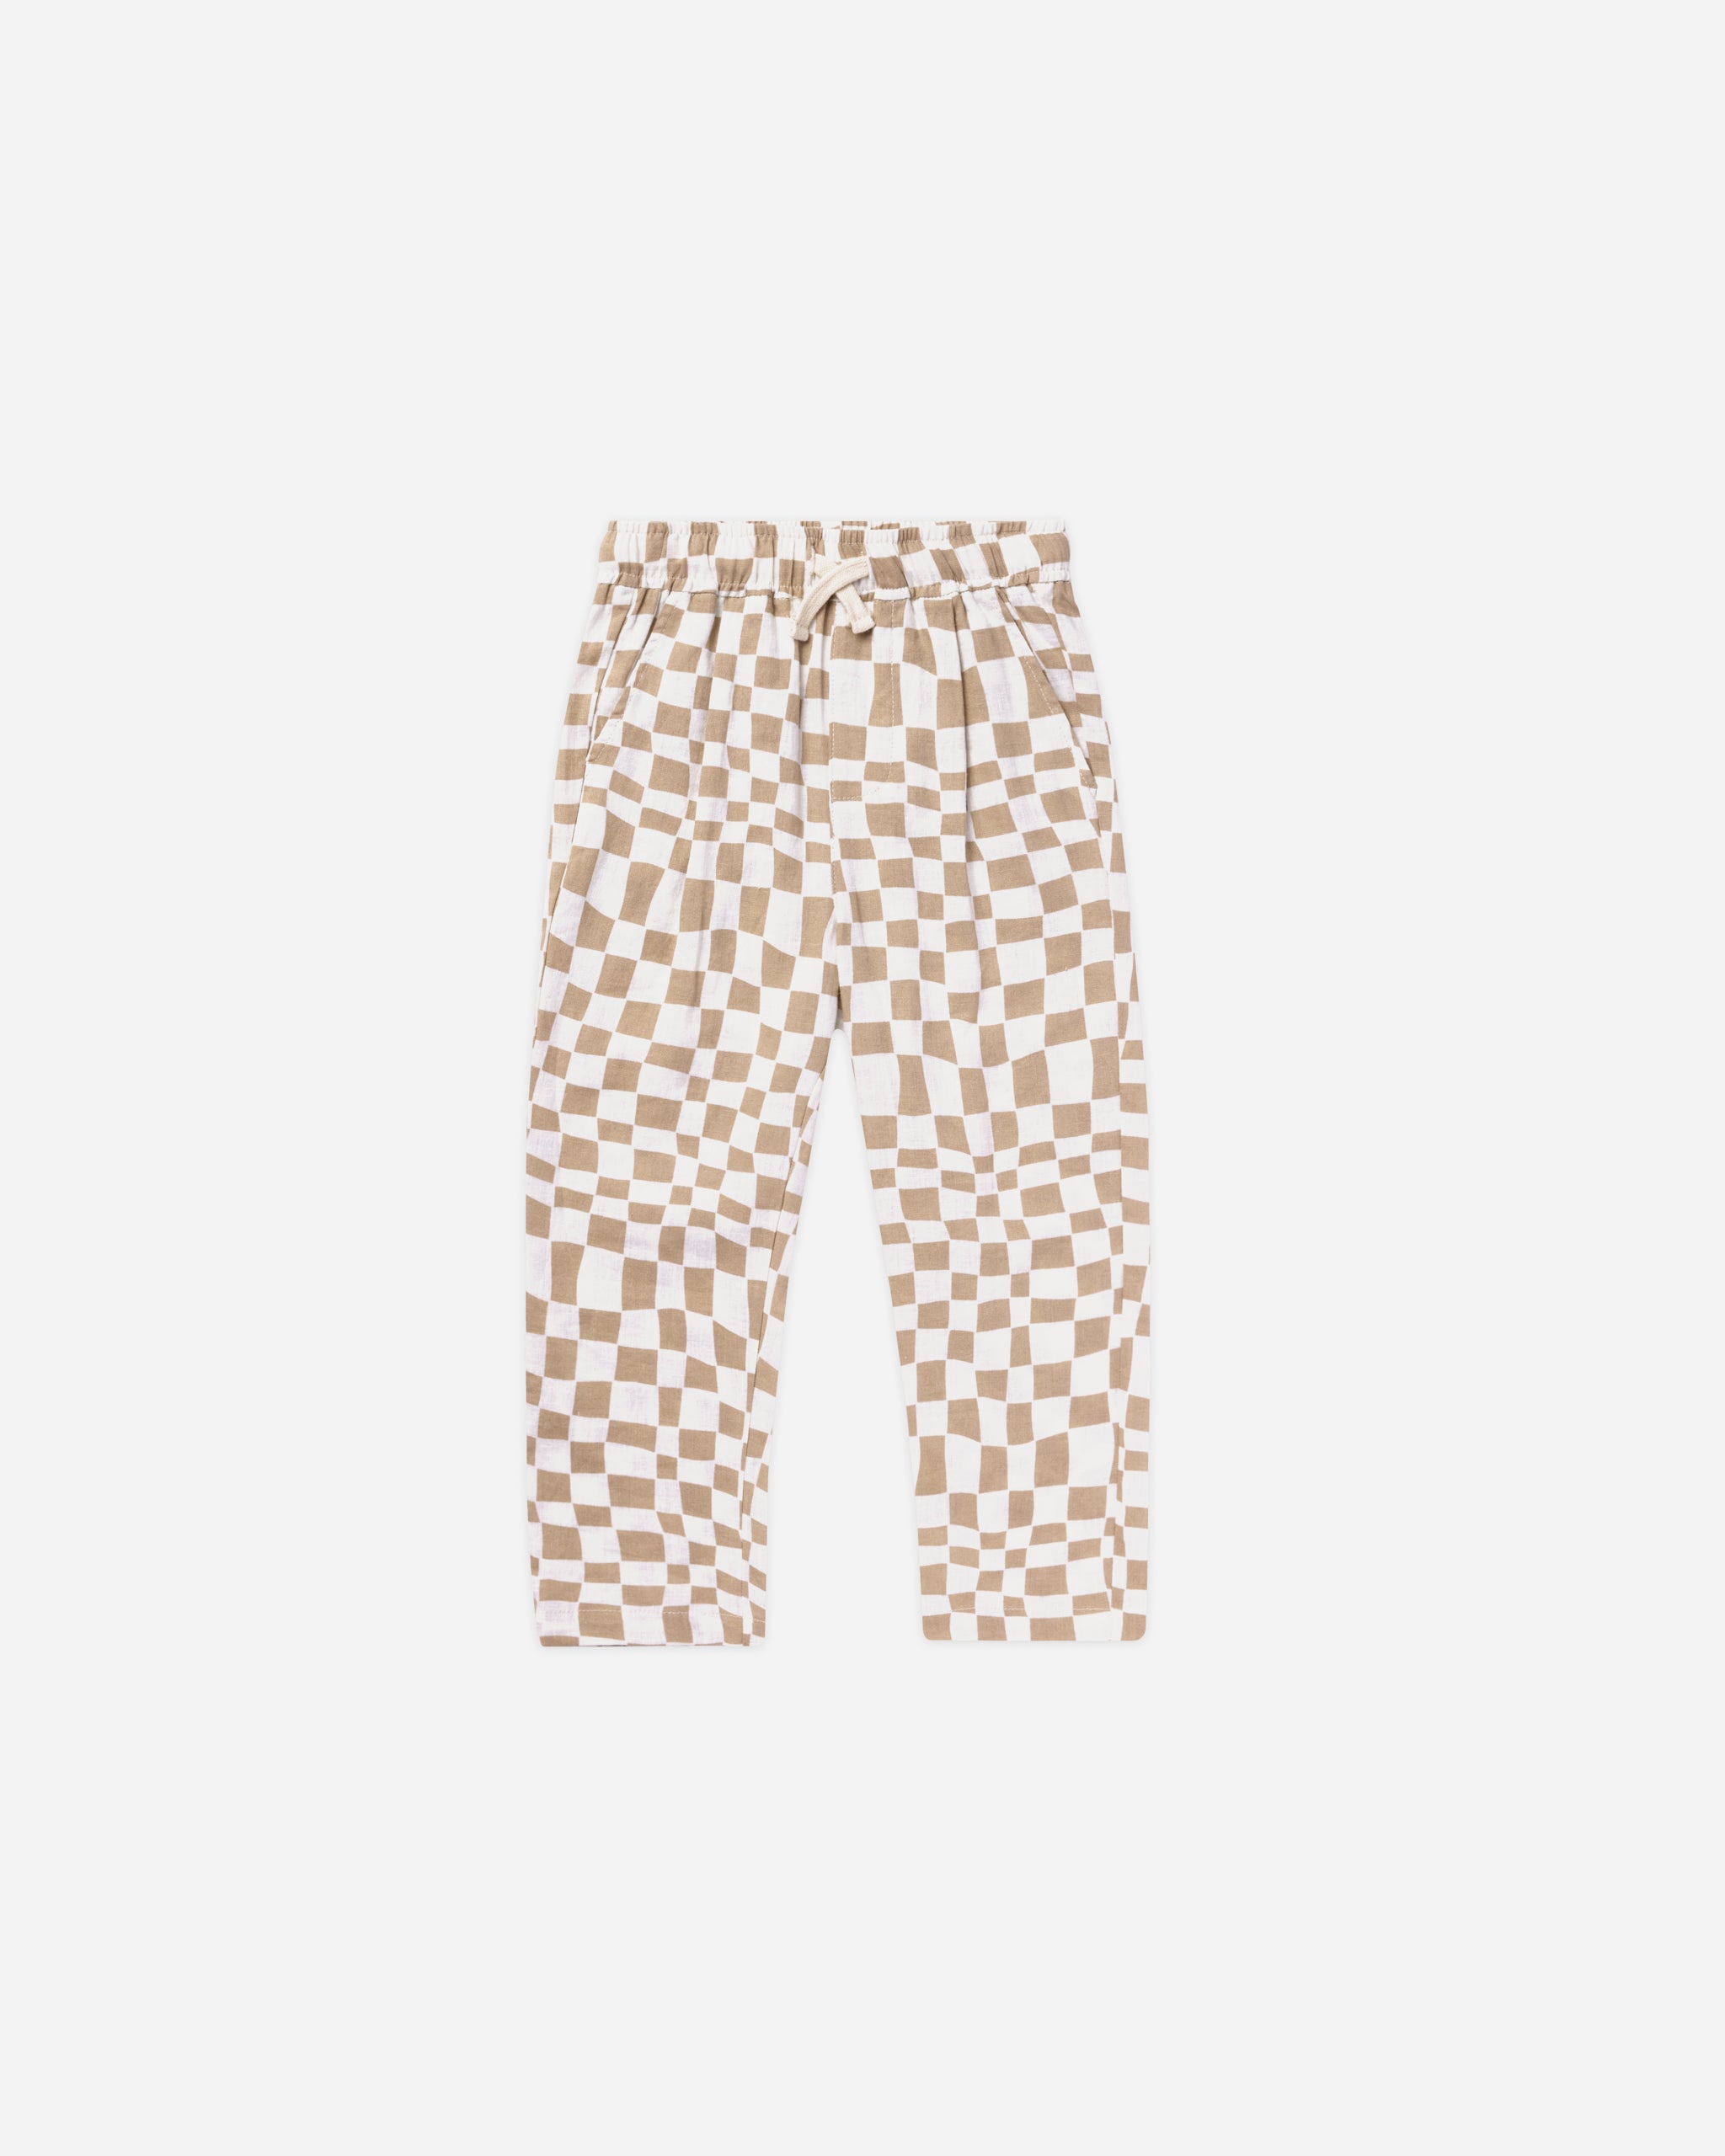 Ryder Pant || Sand Check - Rylee + Cru | Kids Clothes | Trendy Baby Clothes | Modern Infant Outfits |